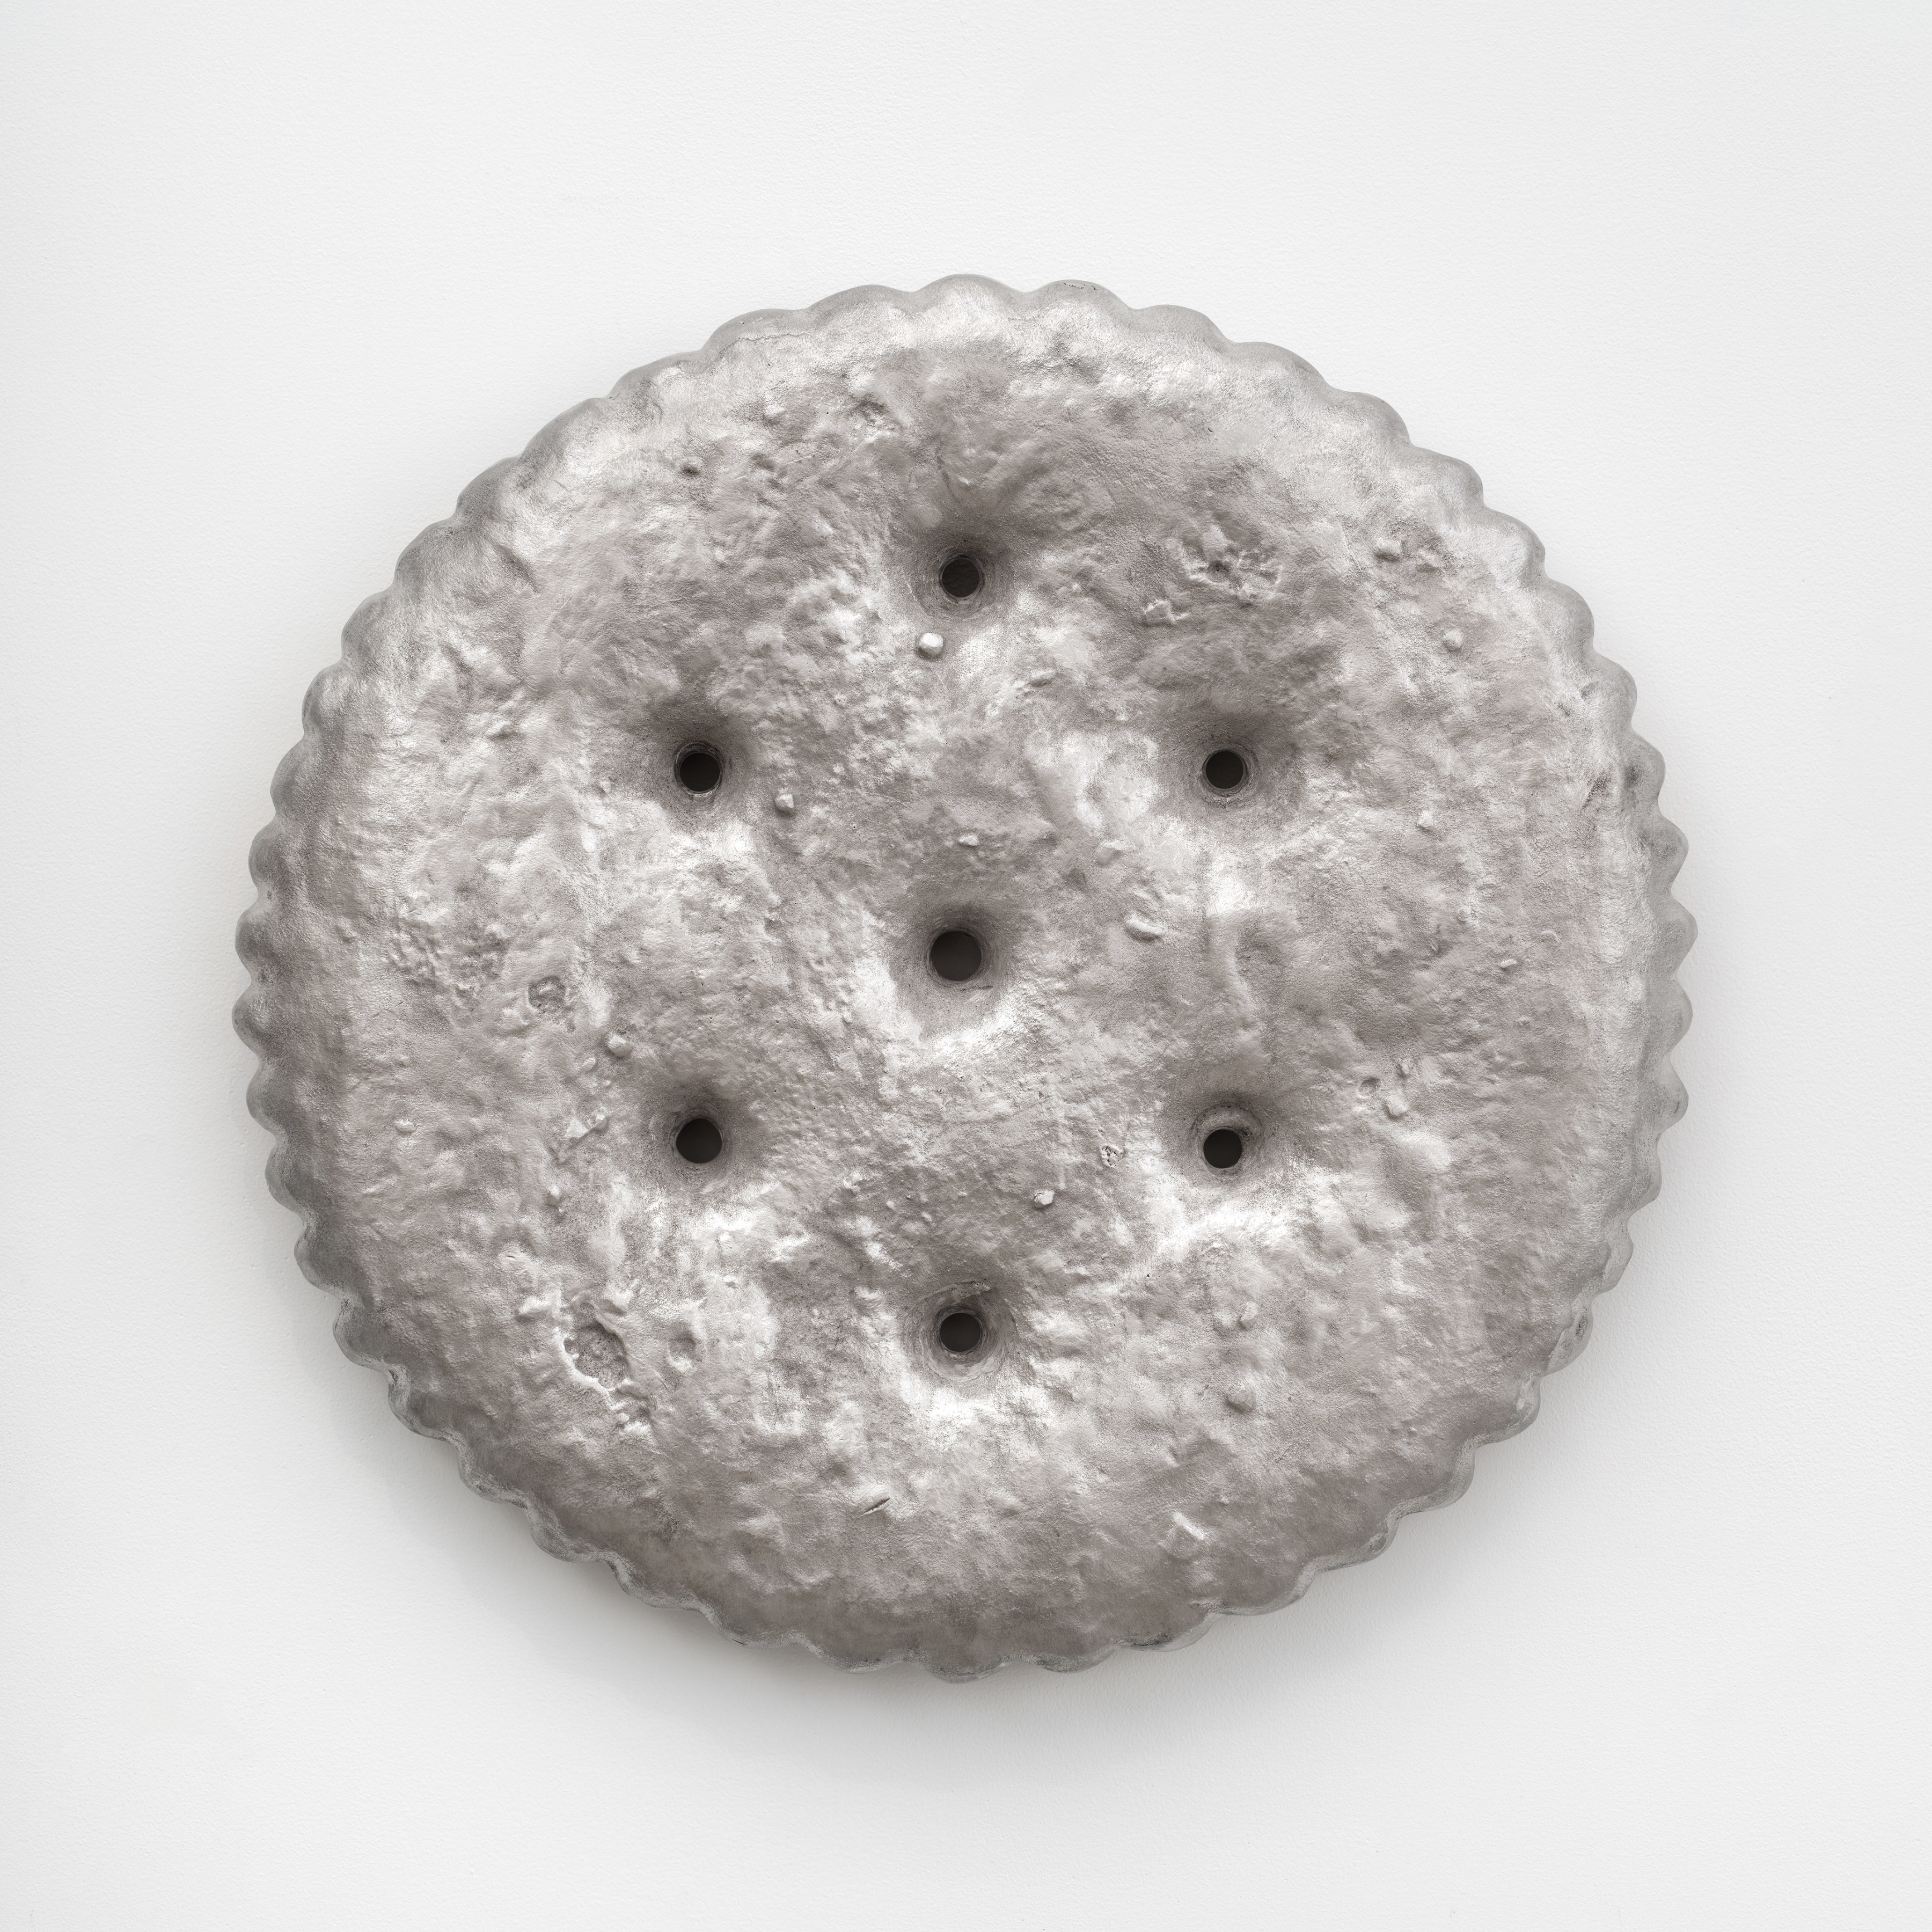 A large aluminum cast ritz cracker mounted to the wall